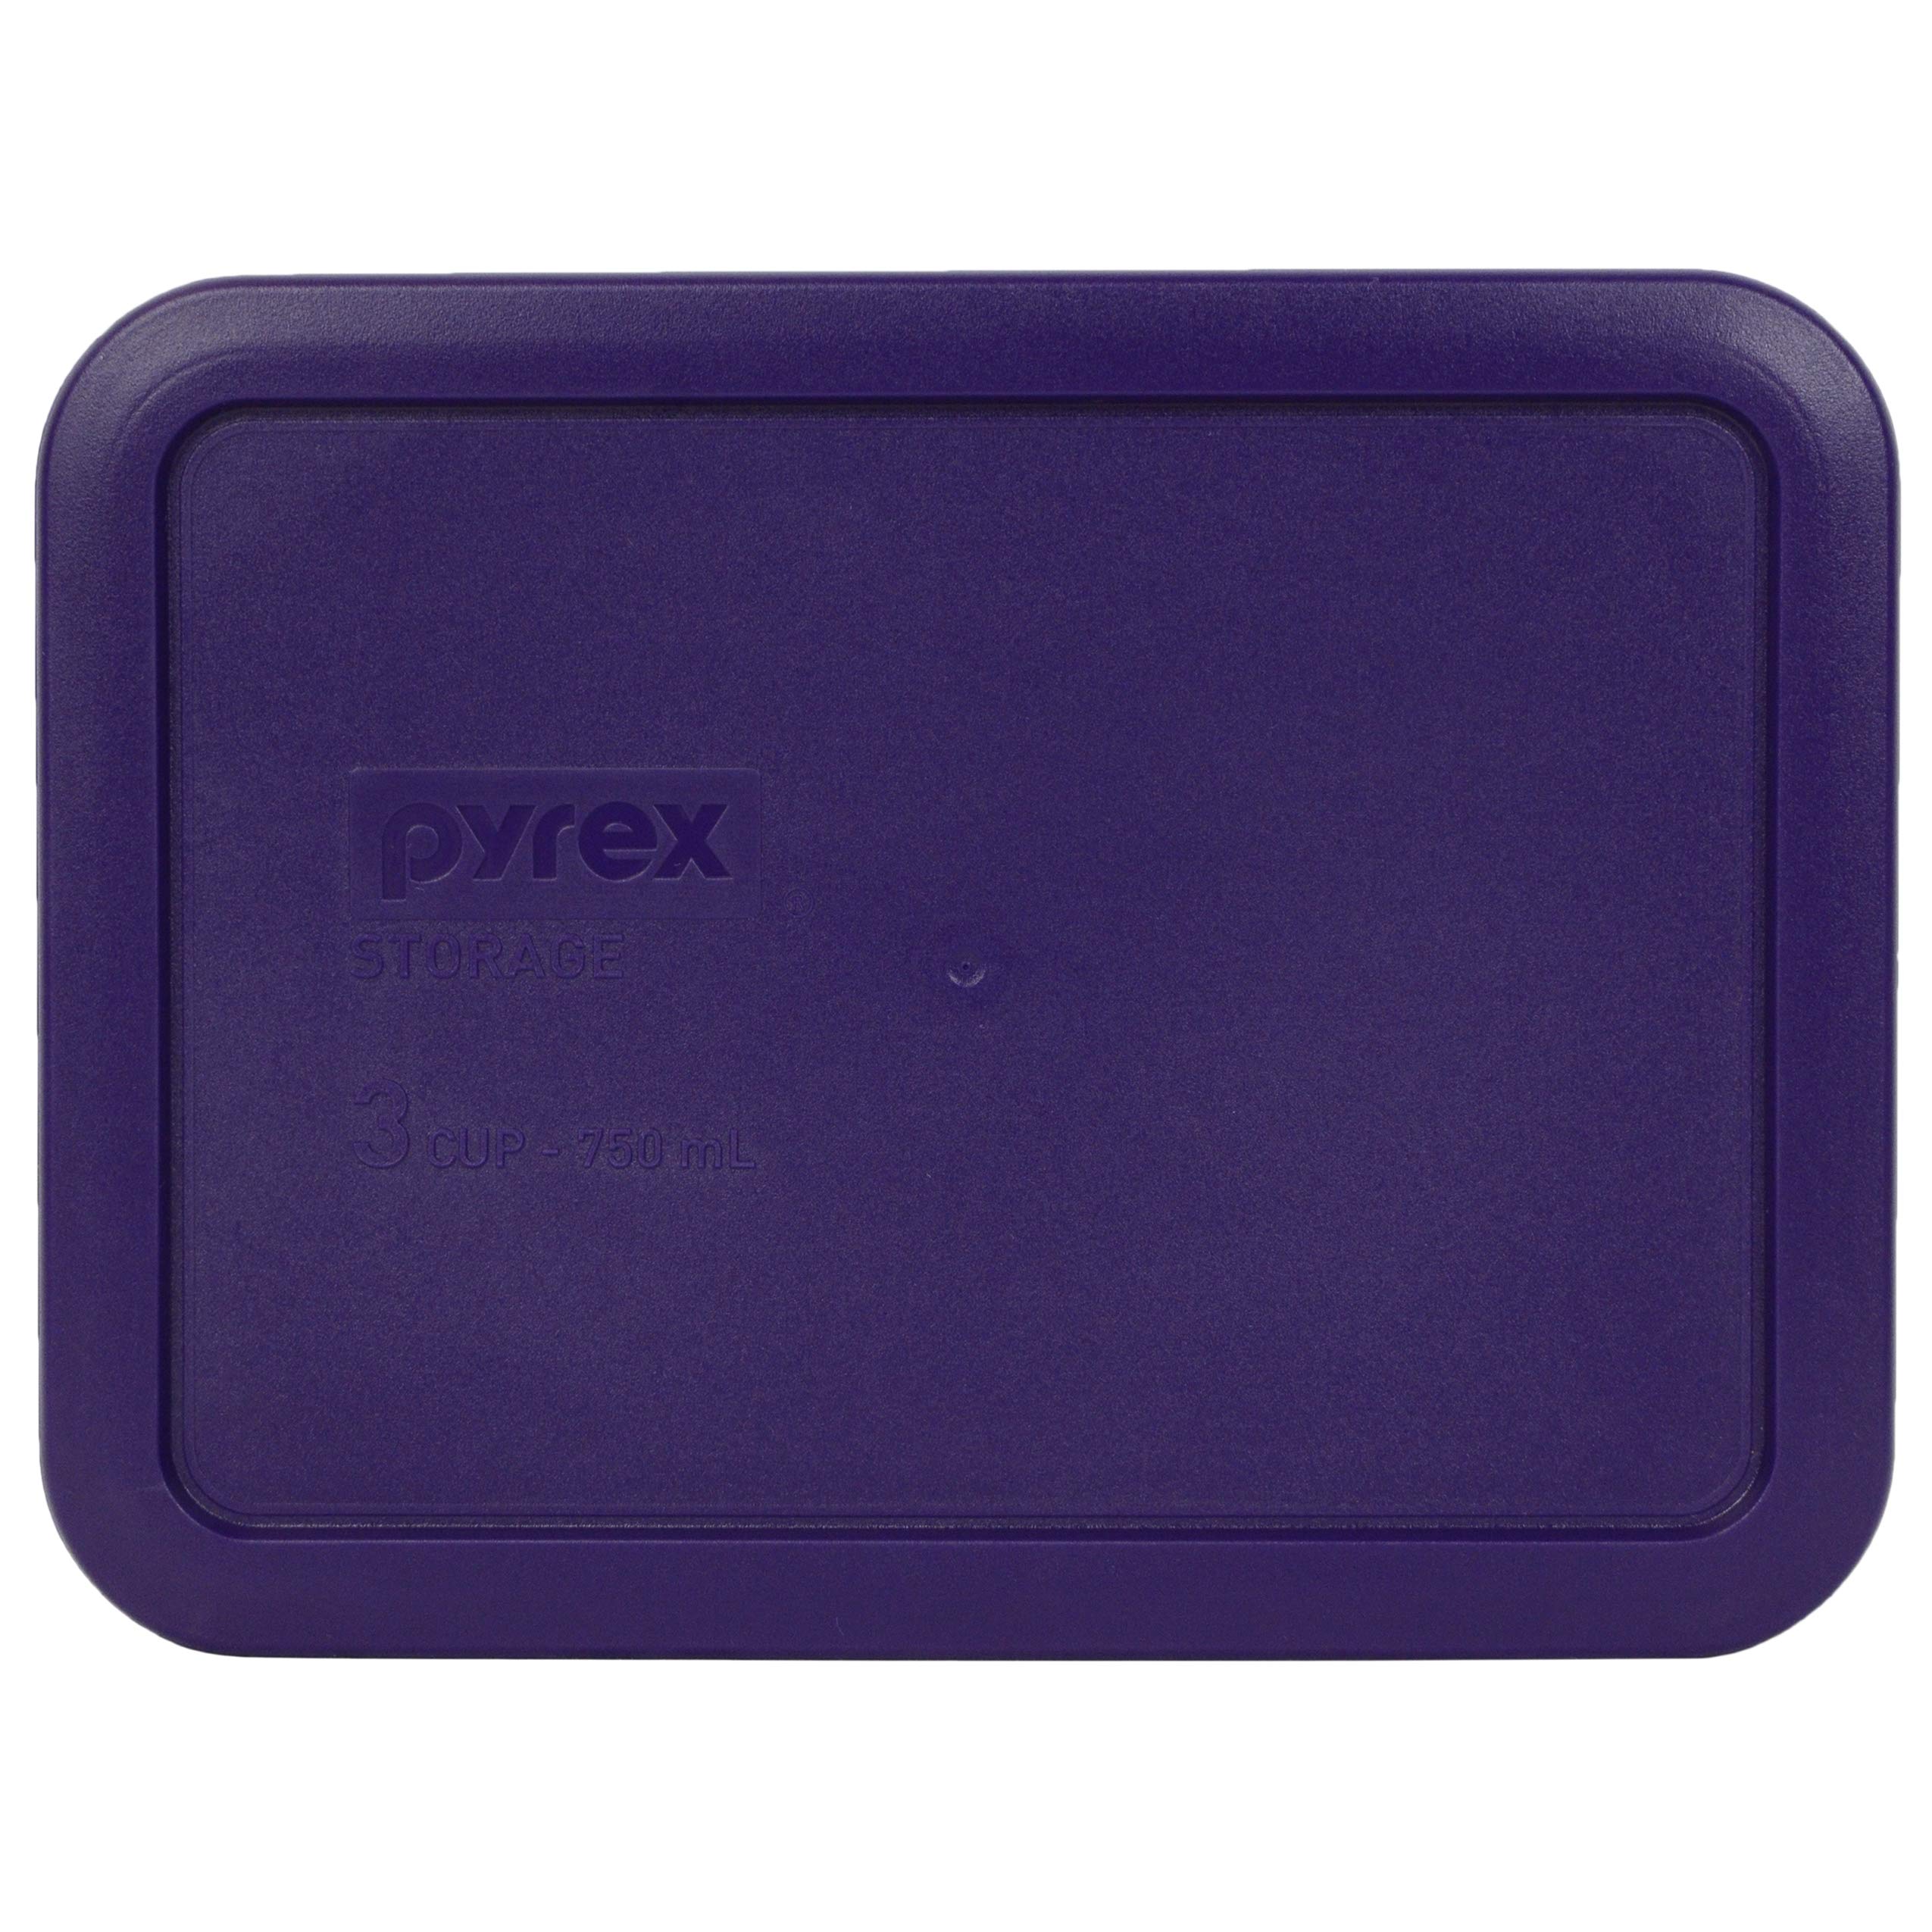 Pyrex (1) 7210-PC 3-Cup Purple Lid, (1) 7210-PC 3-Cup Turquoise Lid, and (1) 7210-PC 3-Cup Green Edamame Lid - Made in the USA